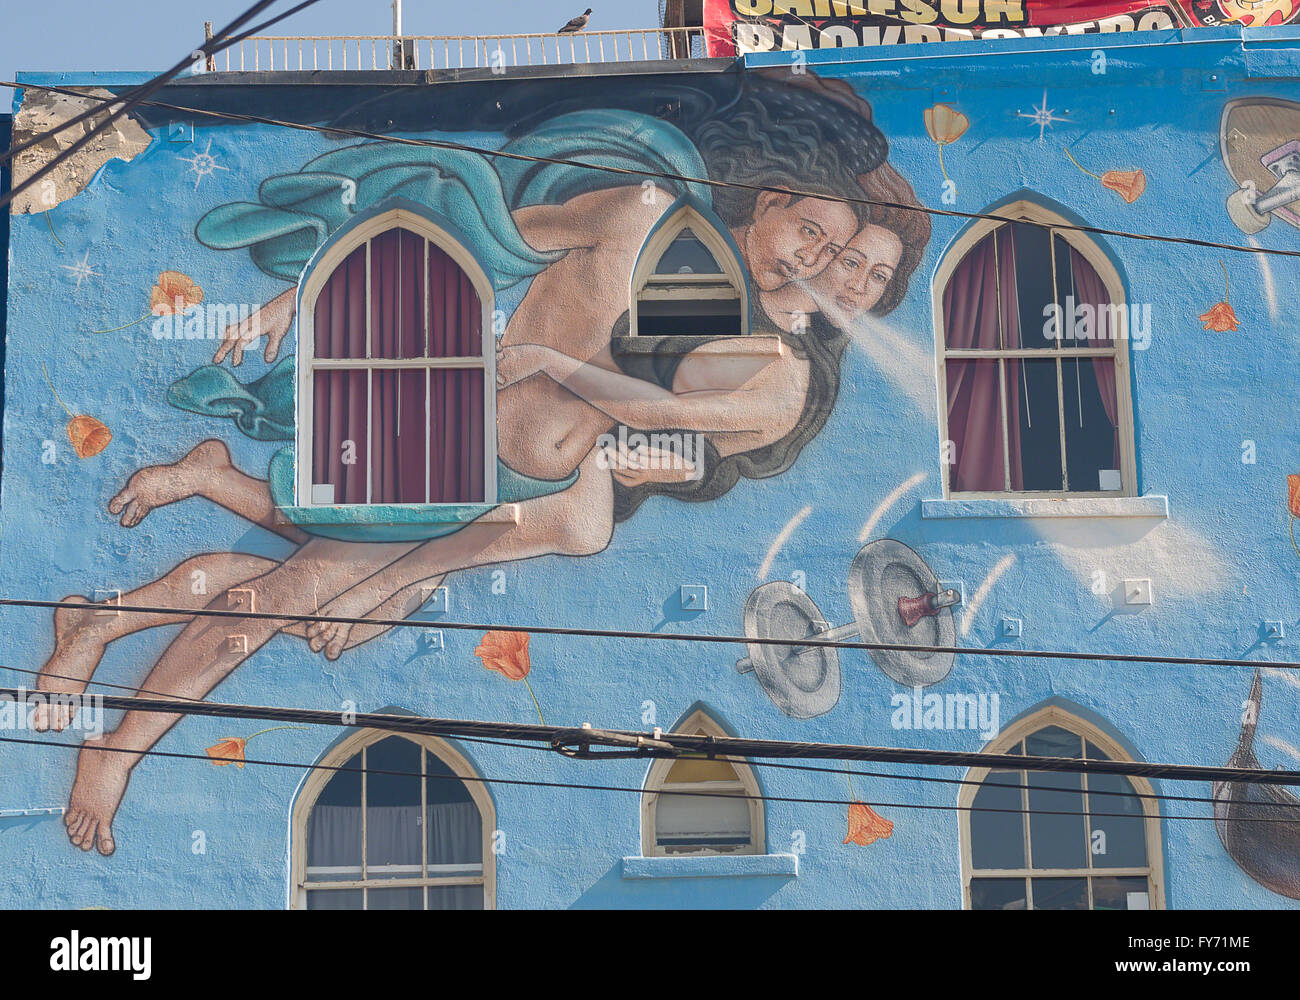 A portion of a colorful mural on the side of a building in Venice, California depicts a man with holding a woman while flying Stock Photo